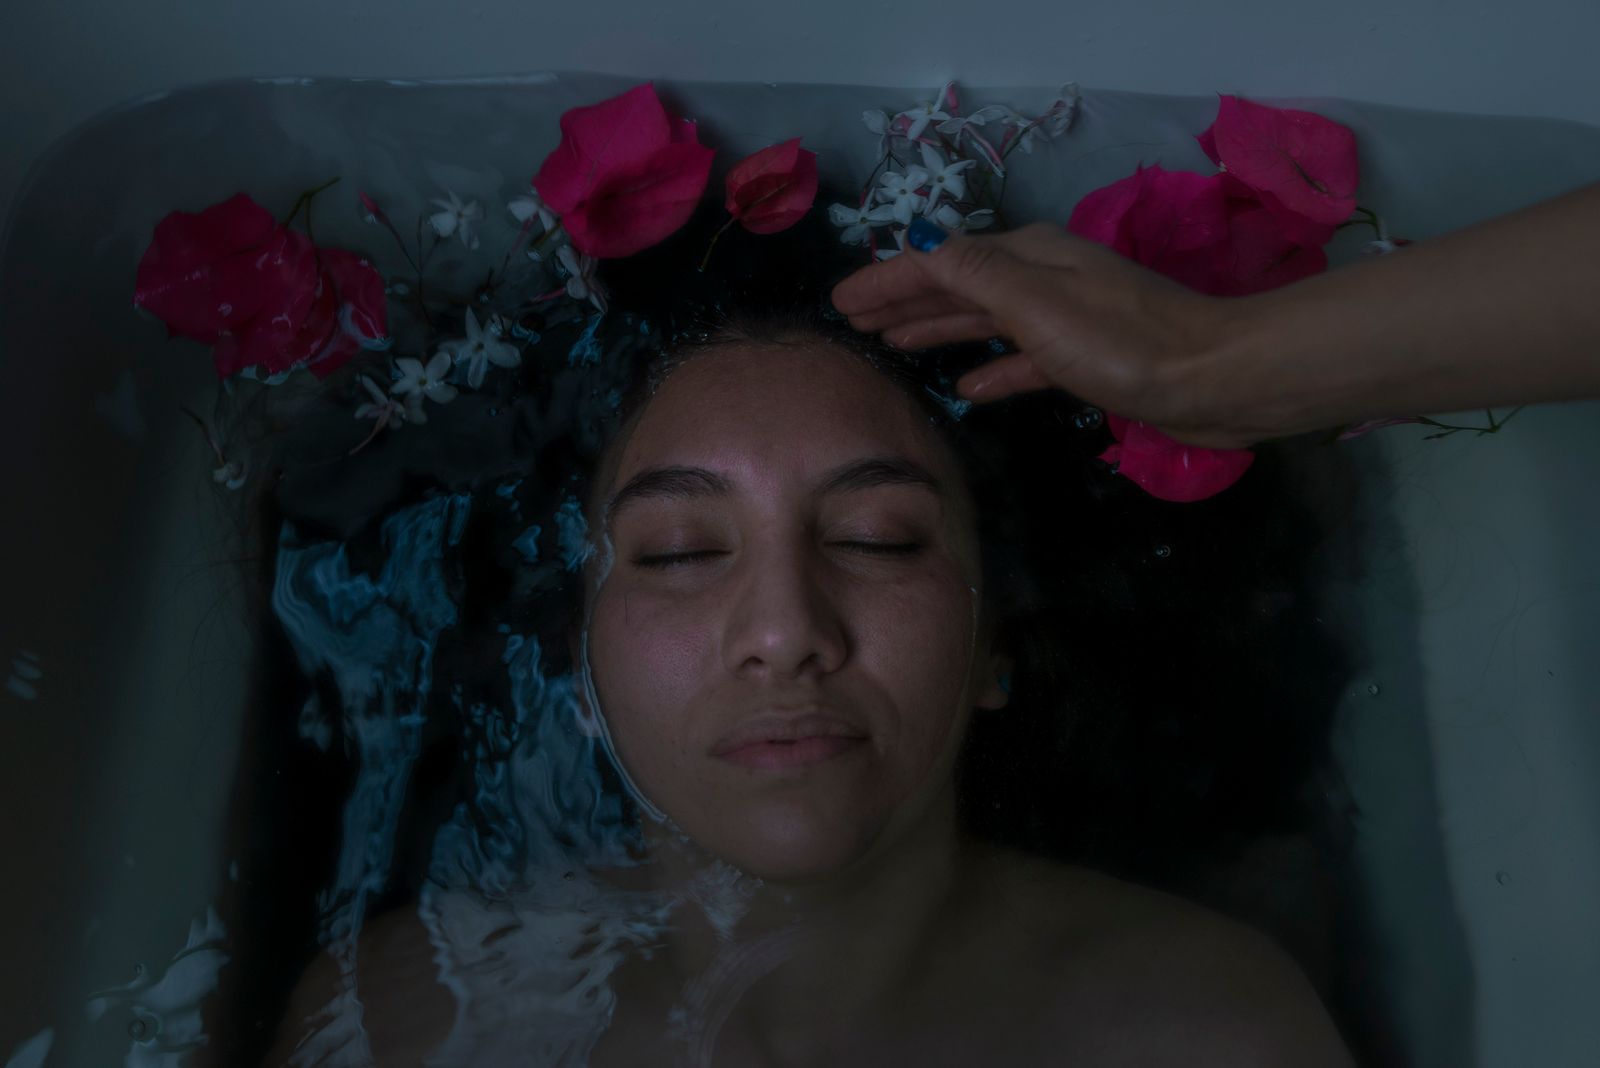 © Sara Aliaga - Image from the Water, for everyone, and for nobody. photography project